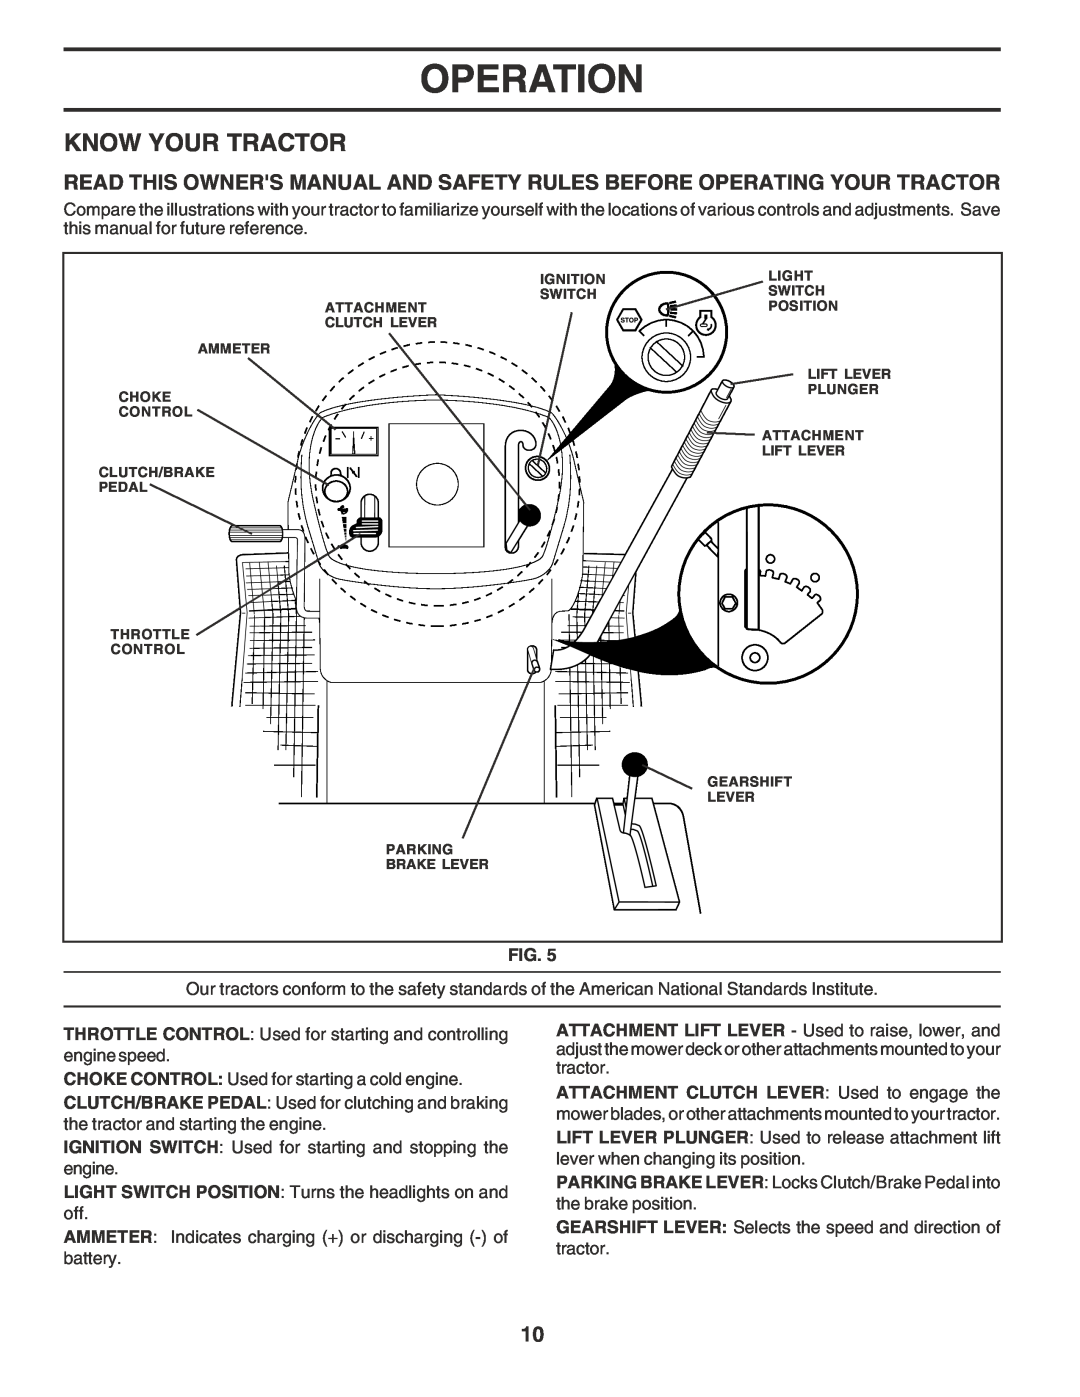 Poulan 181377 owner manual Know Your Tractor, Operation 